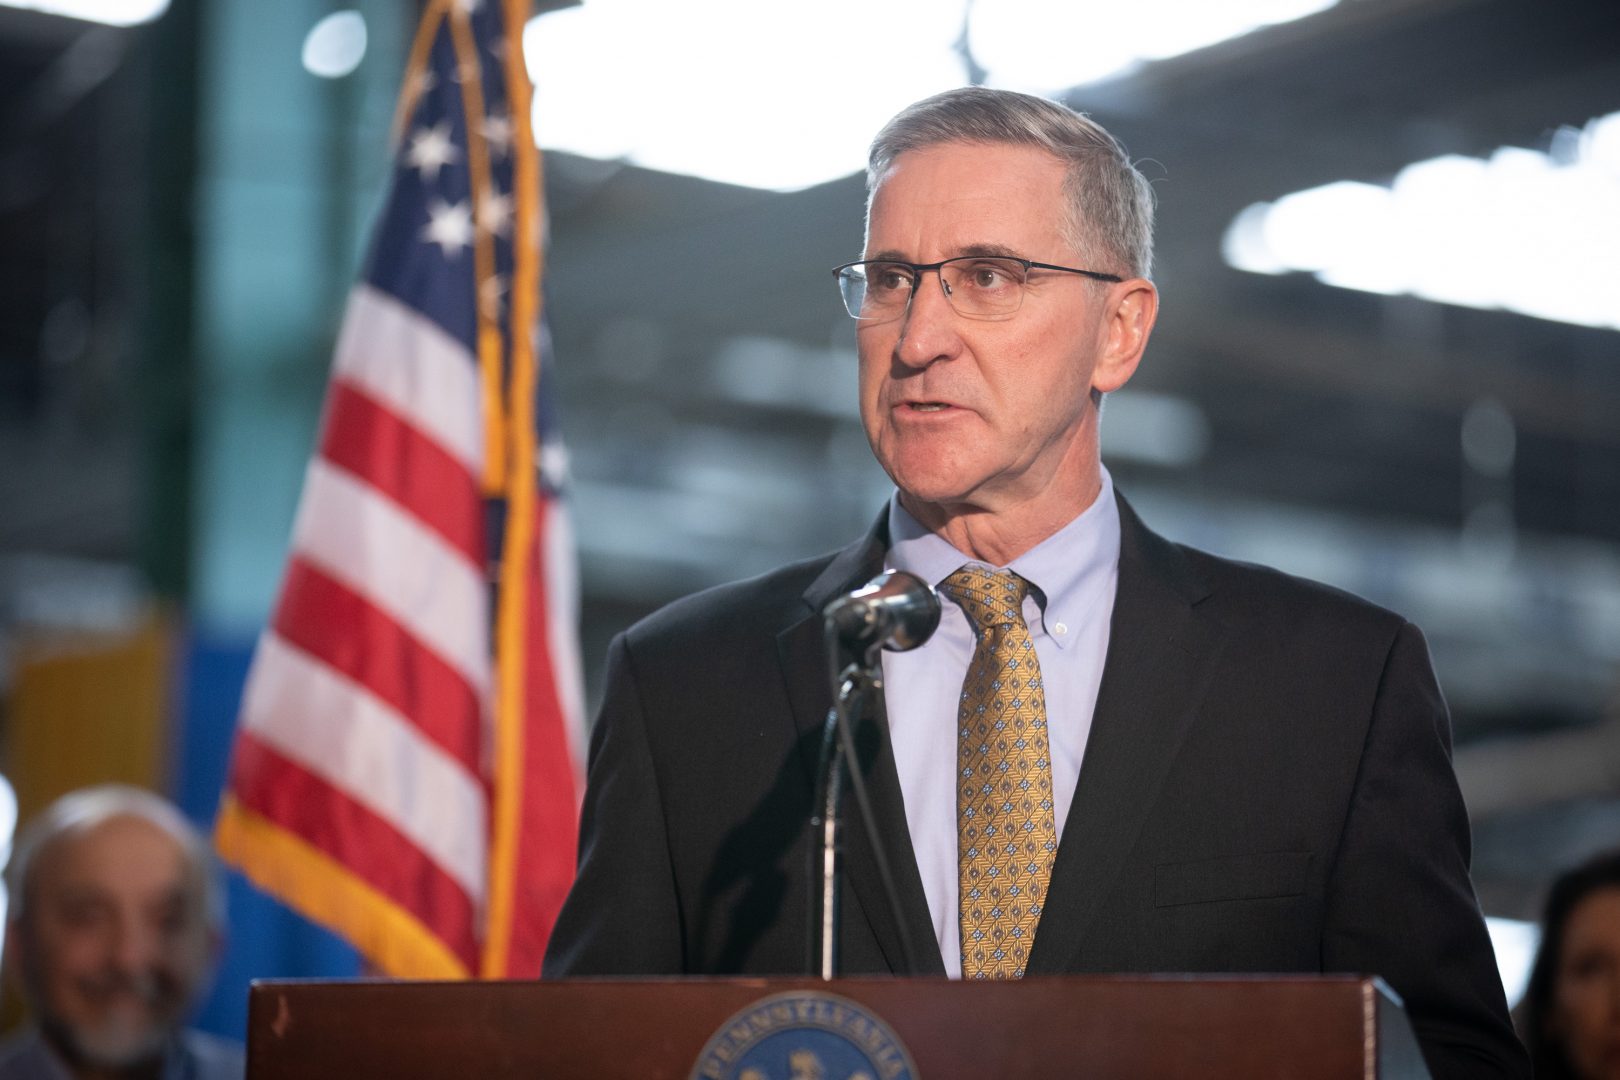 Secretary of Agriculture Russell Redding speaks at the Pennsylvania Farm Show on Jan. 2, 2020.